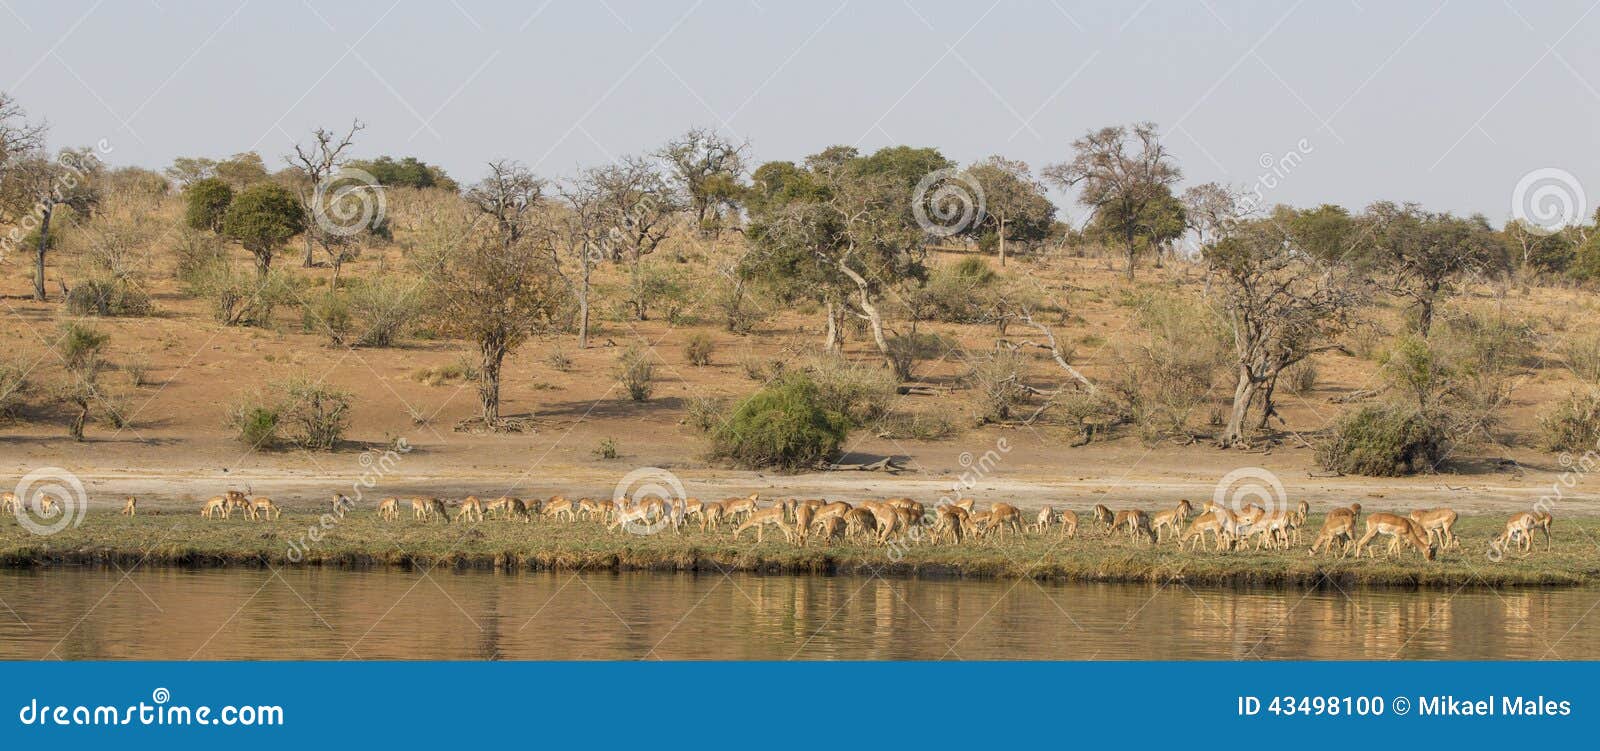 panoramic view of grant's gazelles on choebe river